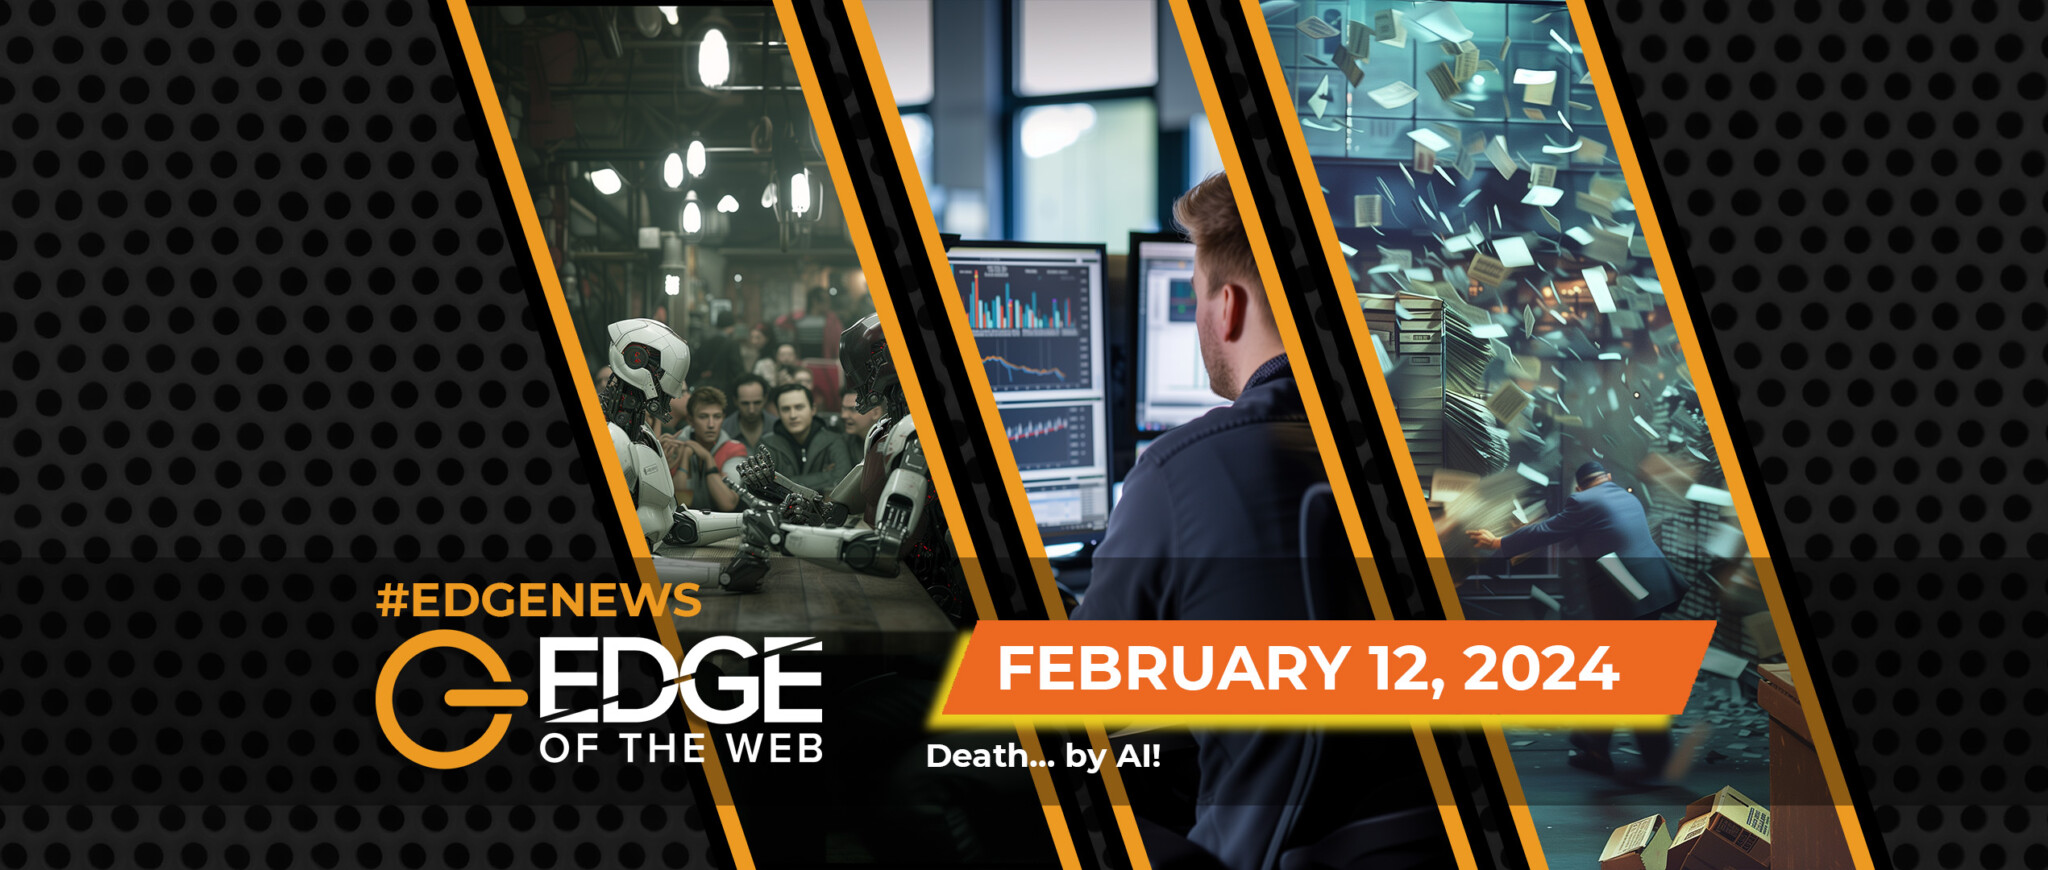 661 | News from the EDGE | Week of 2.12.2024